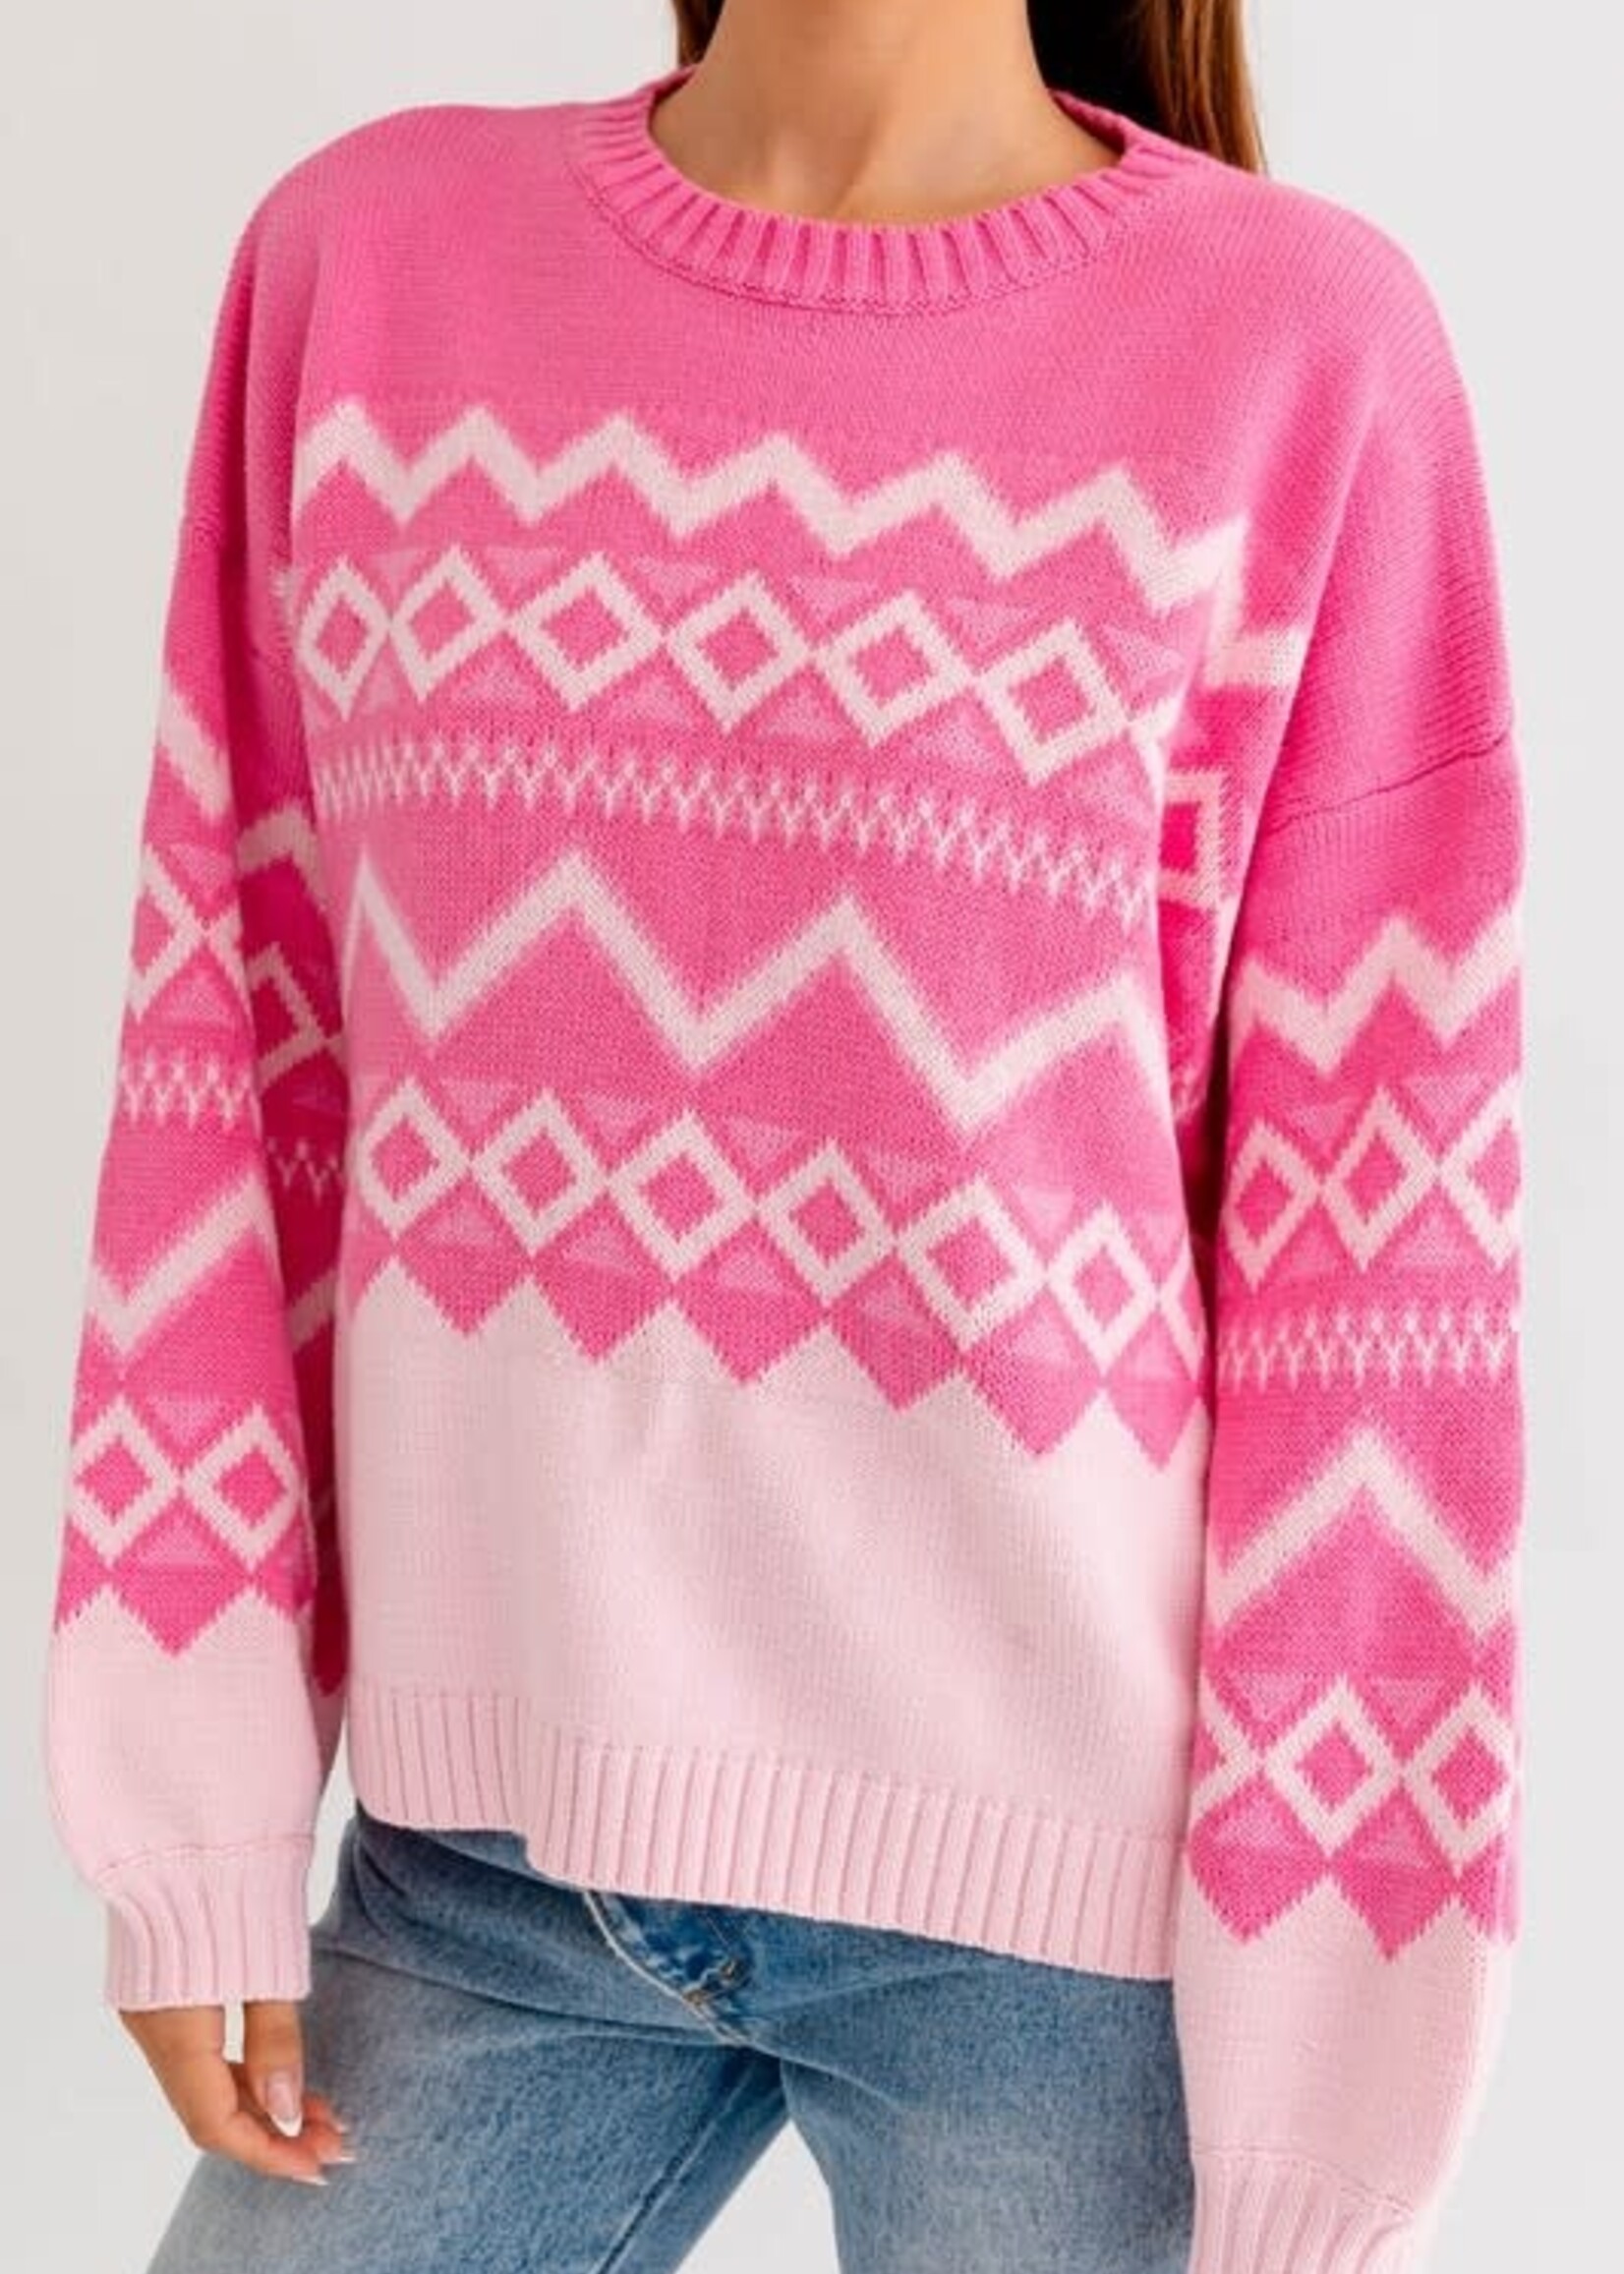 Pinky Promise Sweater